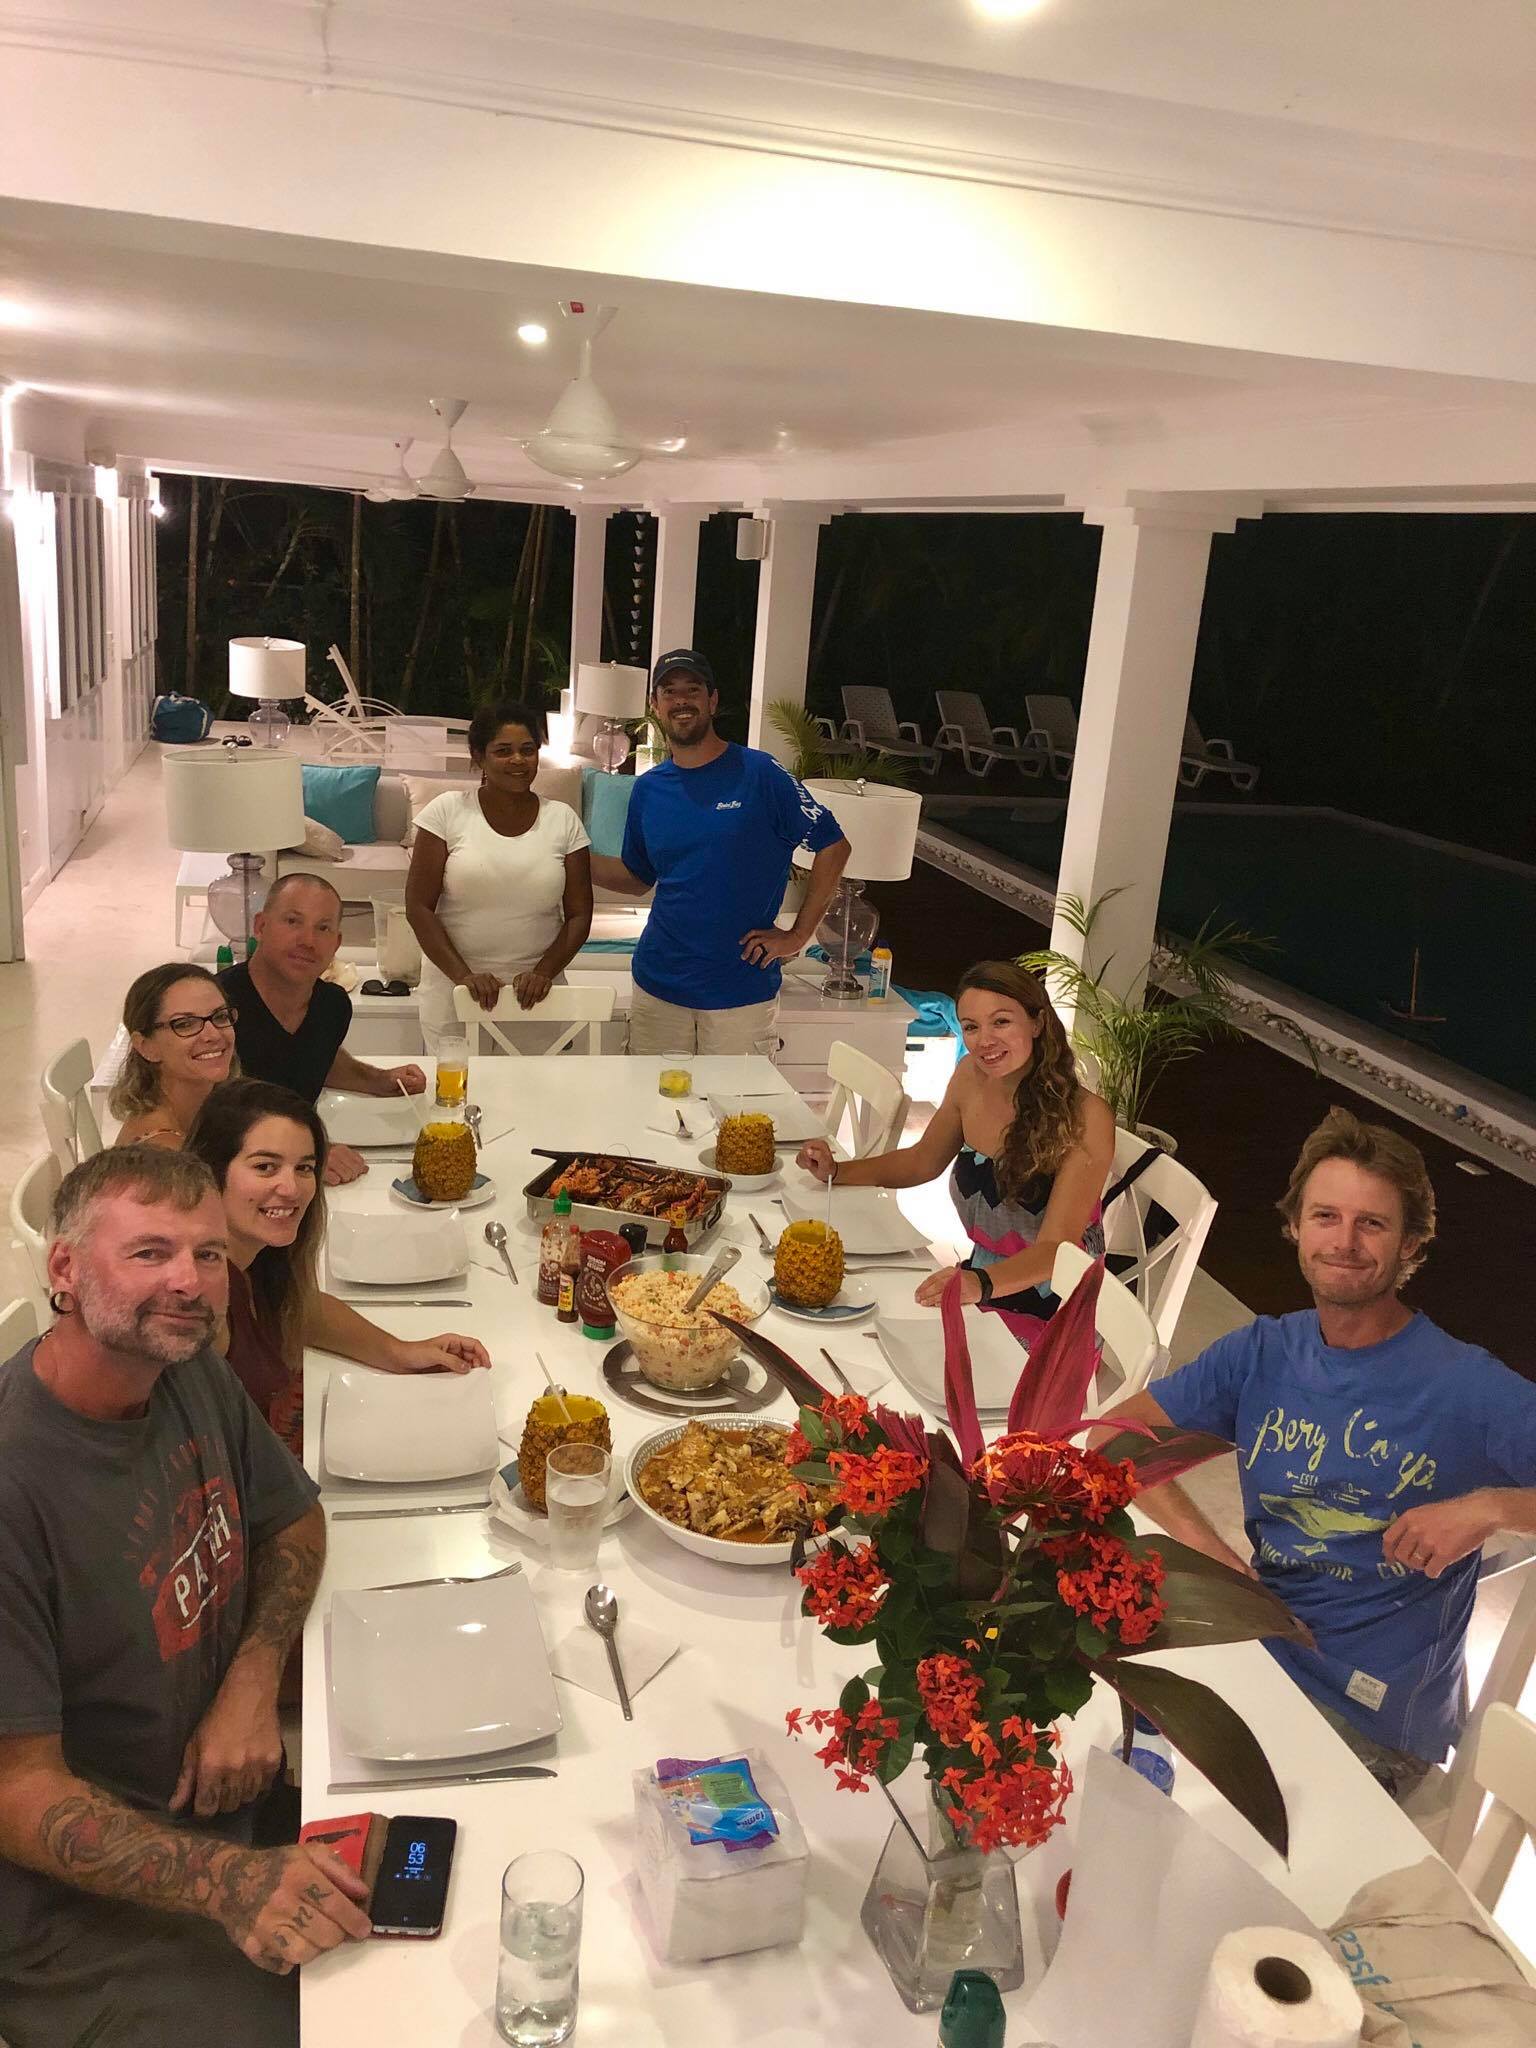 Liveaboard Life Day 272: Our Thanksgiving Holiday in Casa Blanca Las Terrenas!